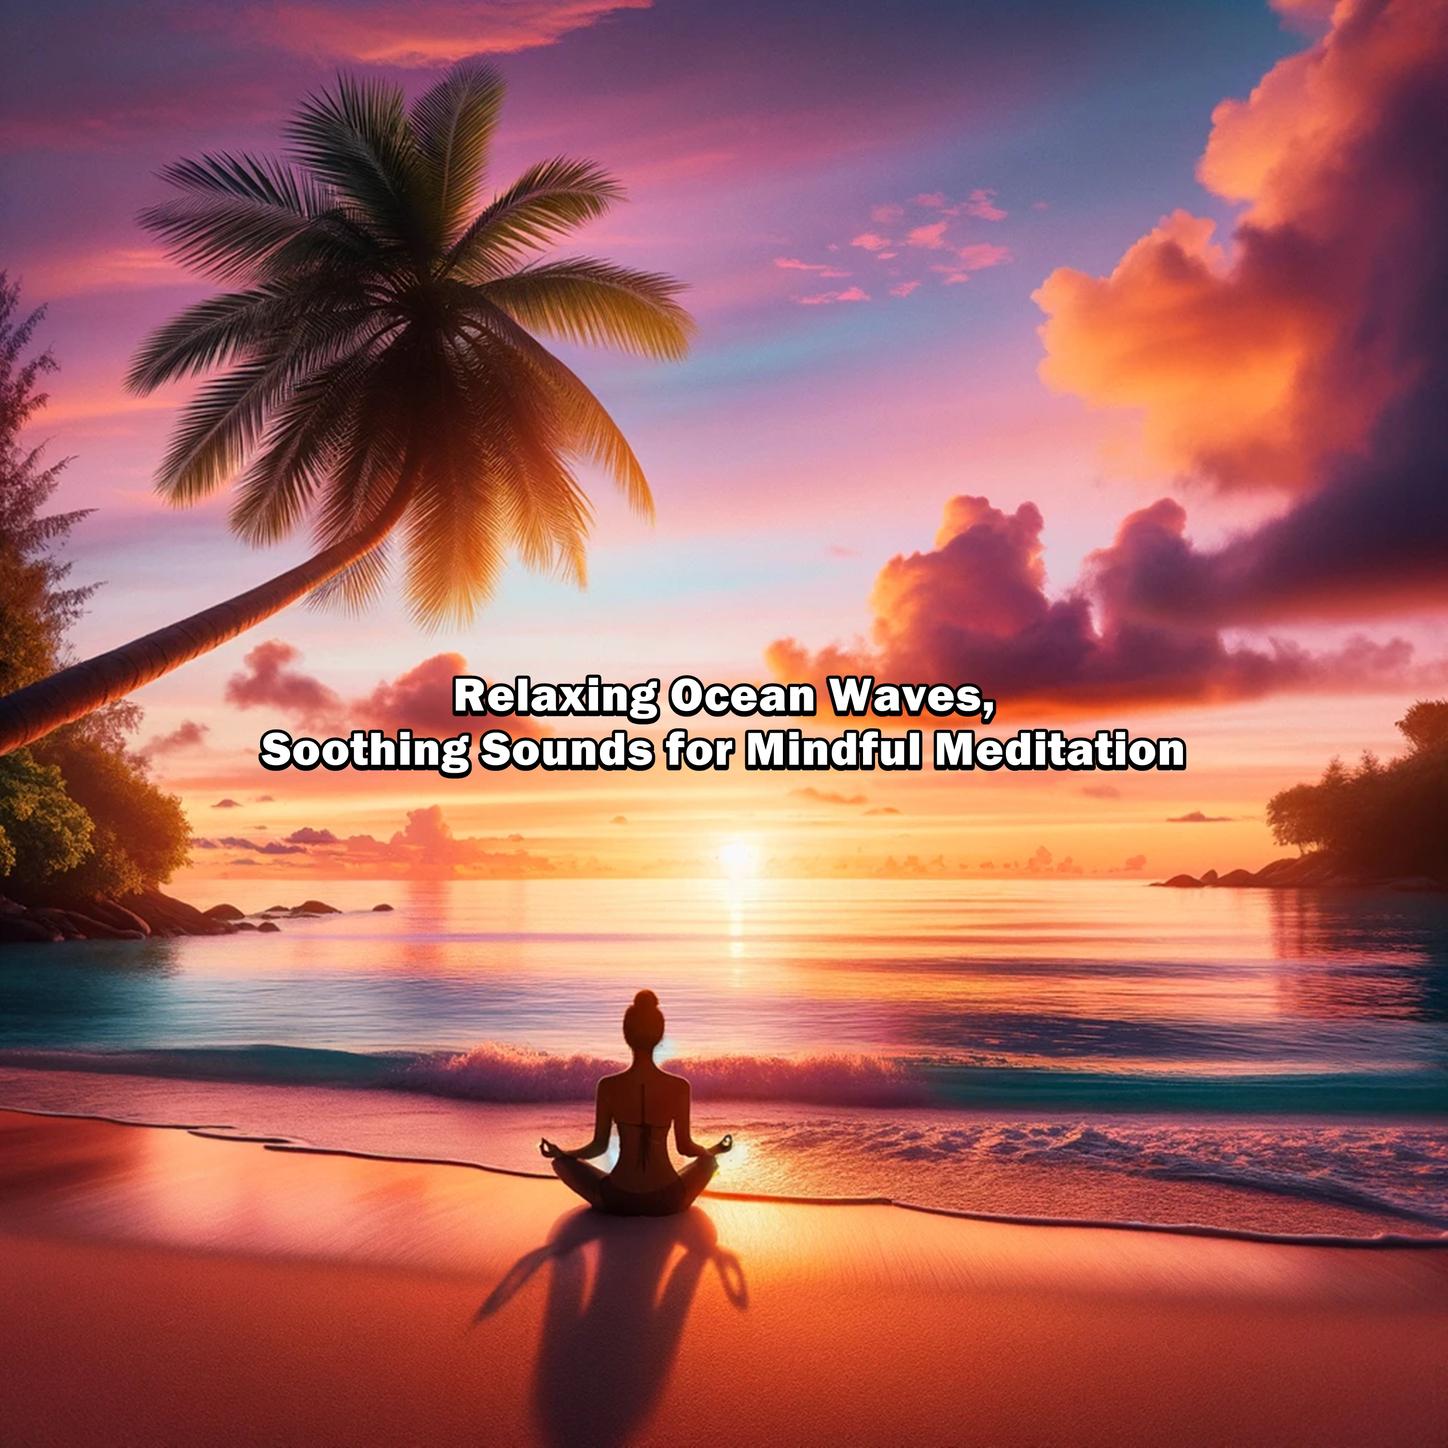 Ocean Sound - Sea Breeze Harmony, Soothing Sounds for Mindful Relaxation